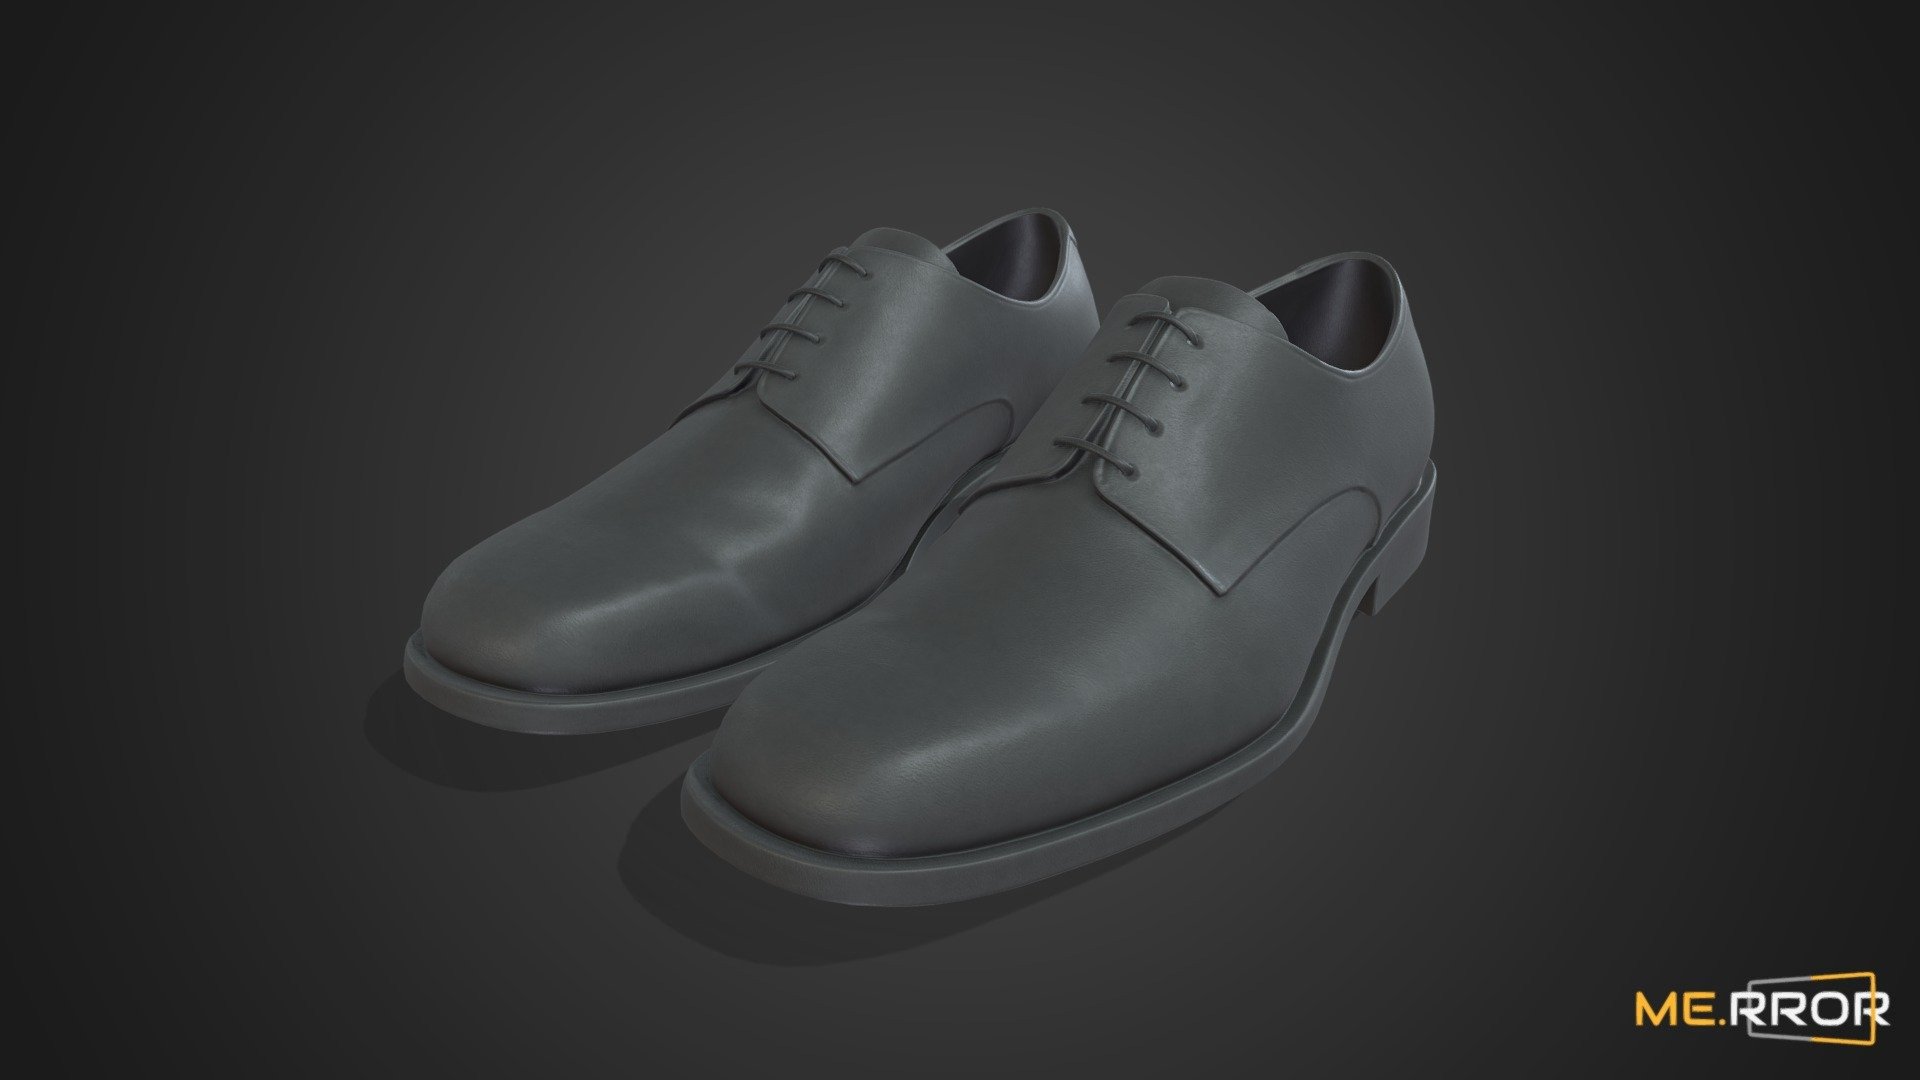 MERROR is a 3D Content PLATFORM which introduces various Asian assets to the 3D world


3DScanning #Photogrametry #ME.RROR - [Game-Ready] Dress Shoe - Buy Royalty Free 3D model by ME.RROR Studio (@merror) 3d model